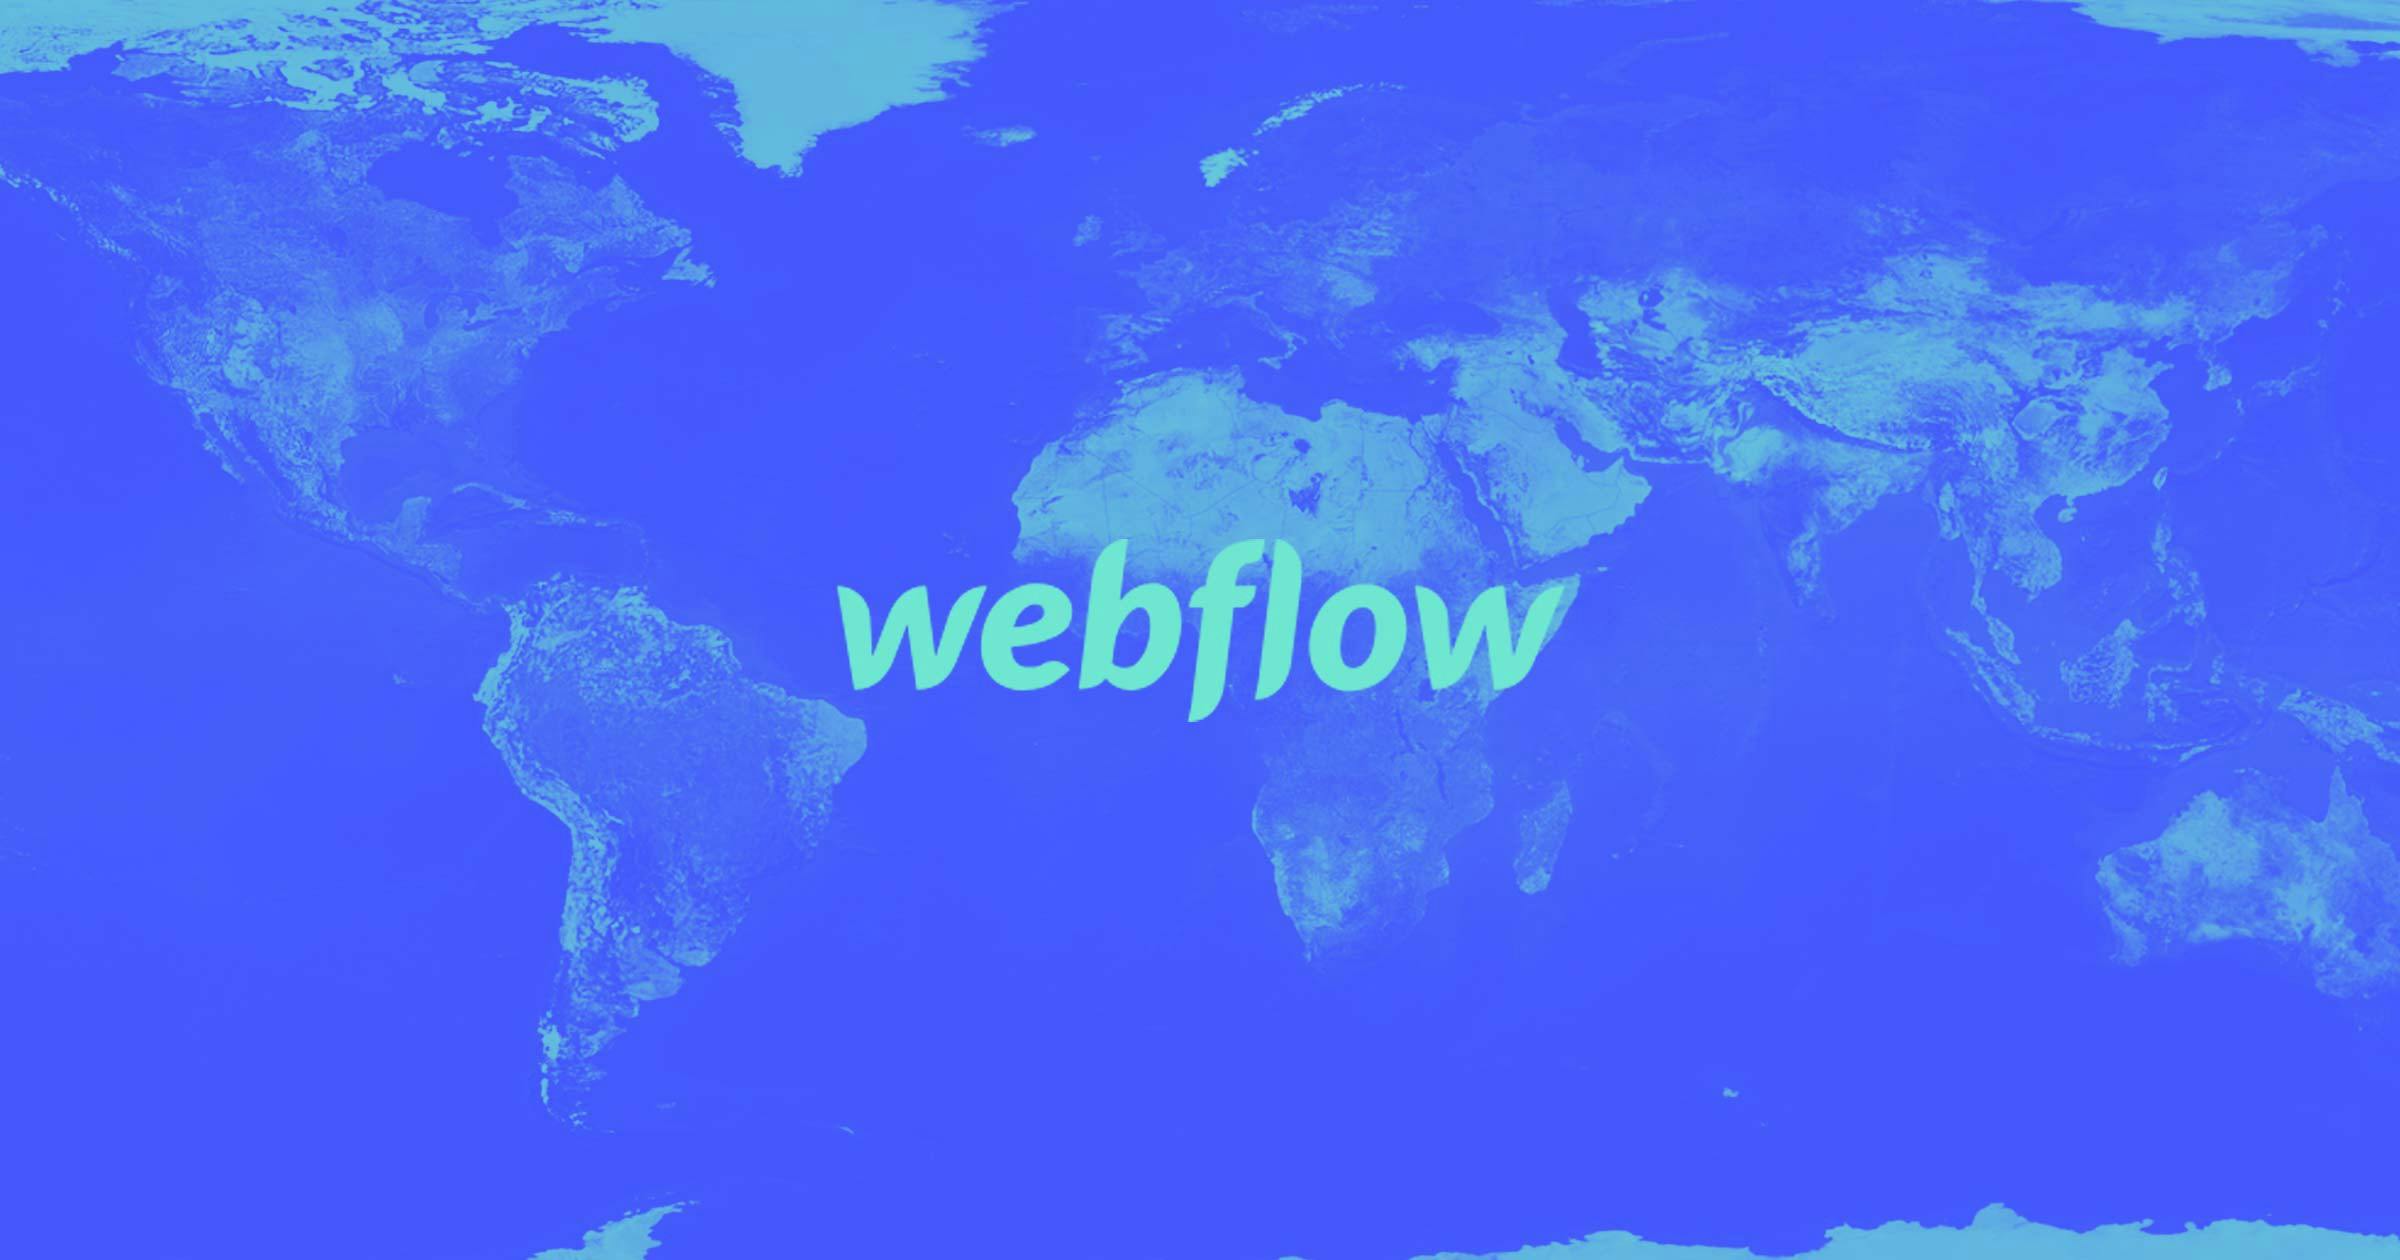 /building-a-remote-friendly-company-an-interview-with-webflow-ceo-vlad-magdalin-3597d55df44c feature image